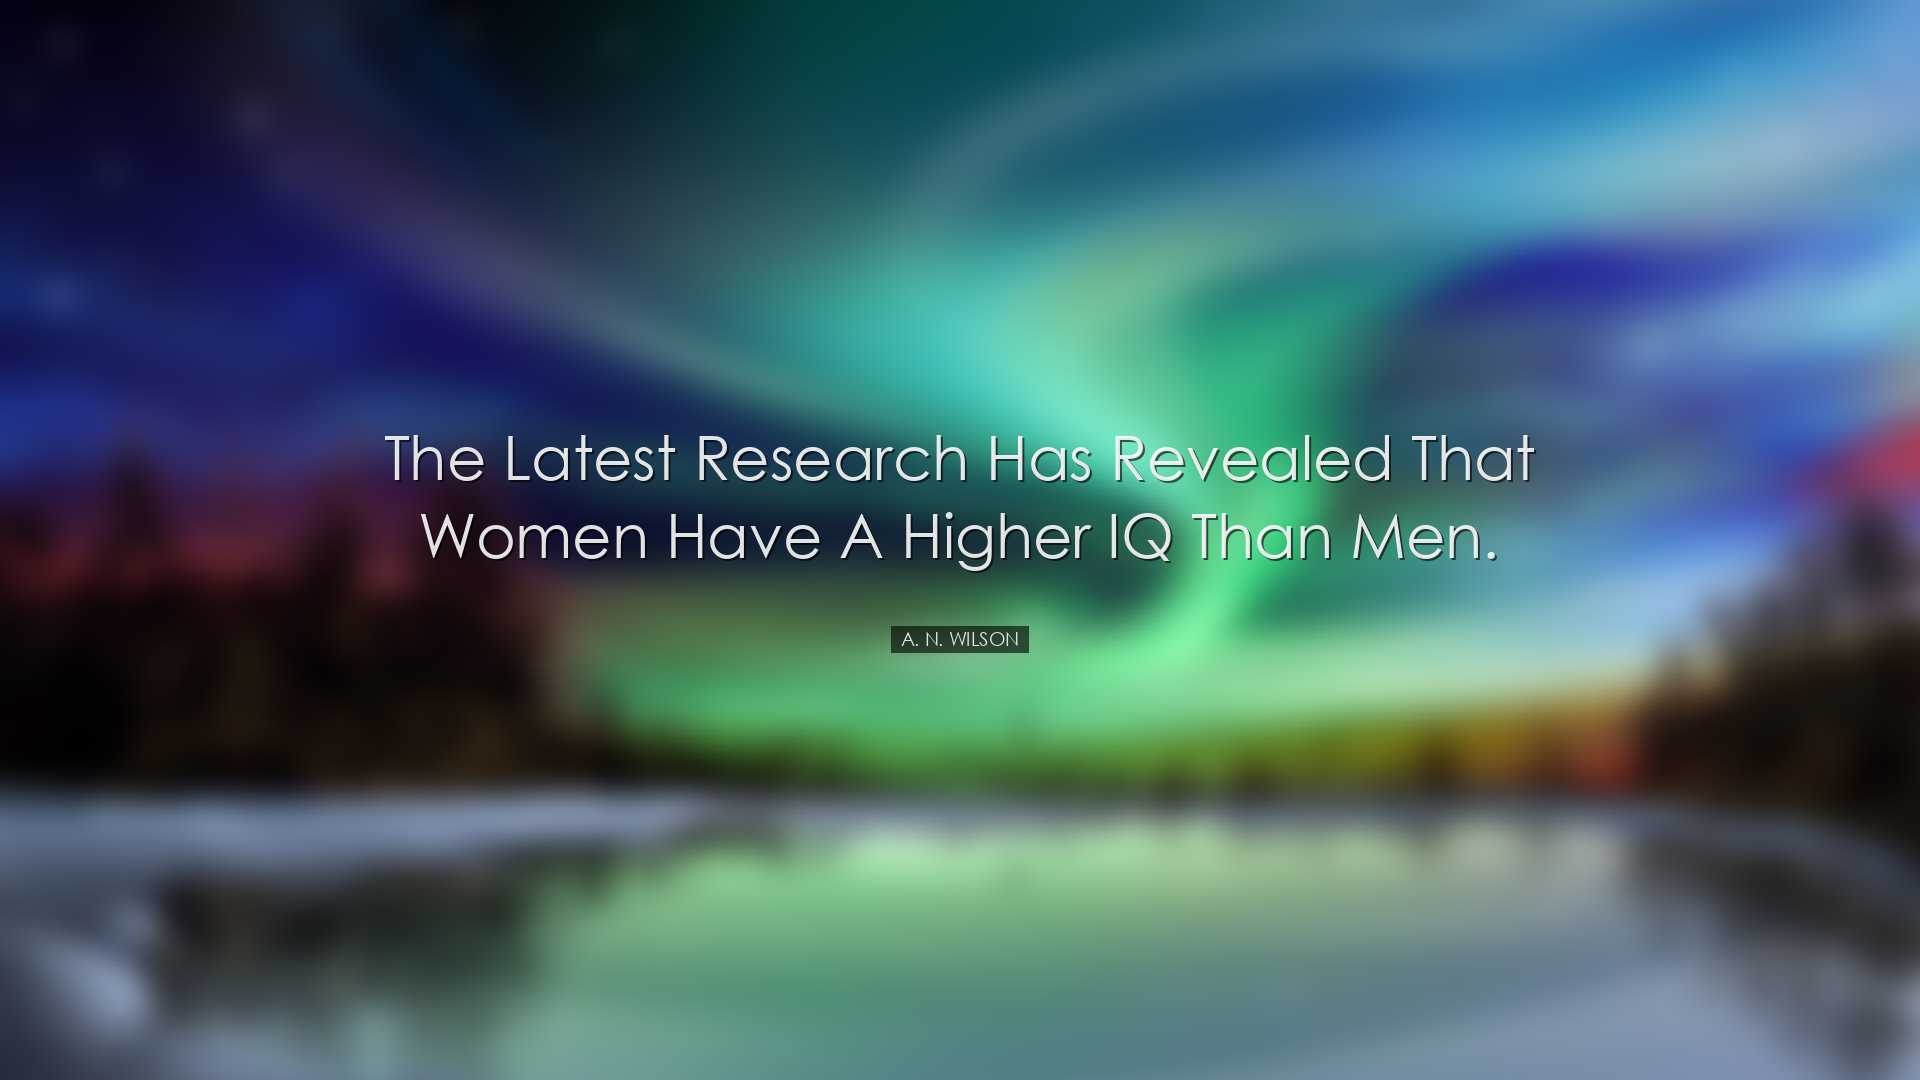 The latest research has revealed that women have a higher IQ than